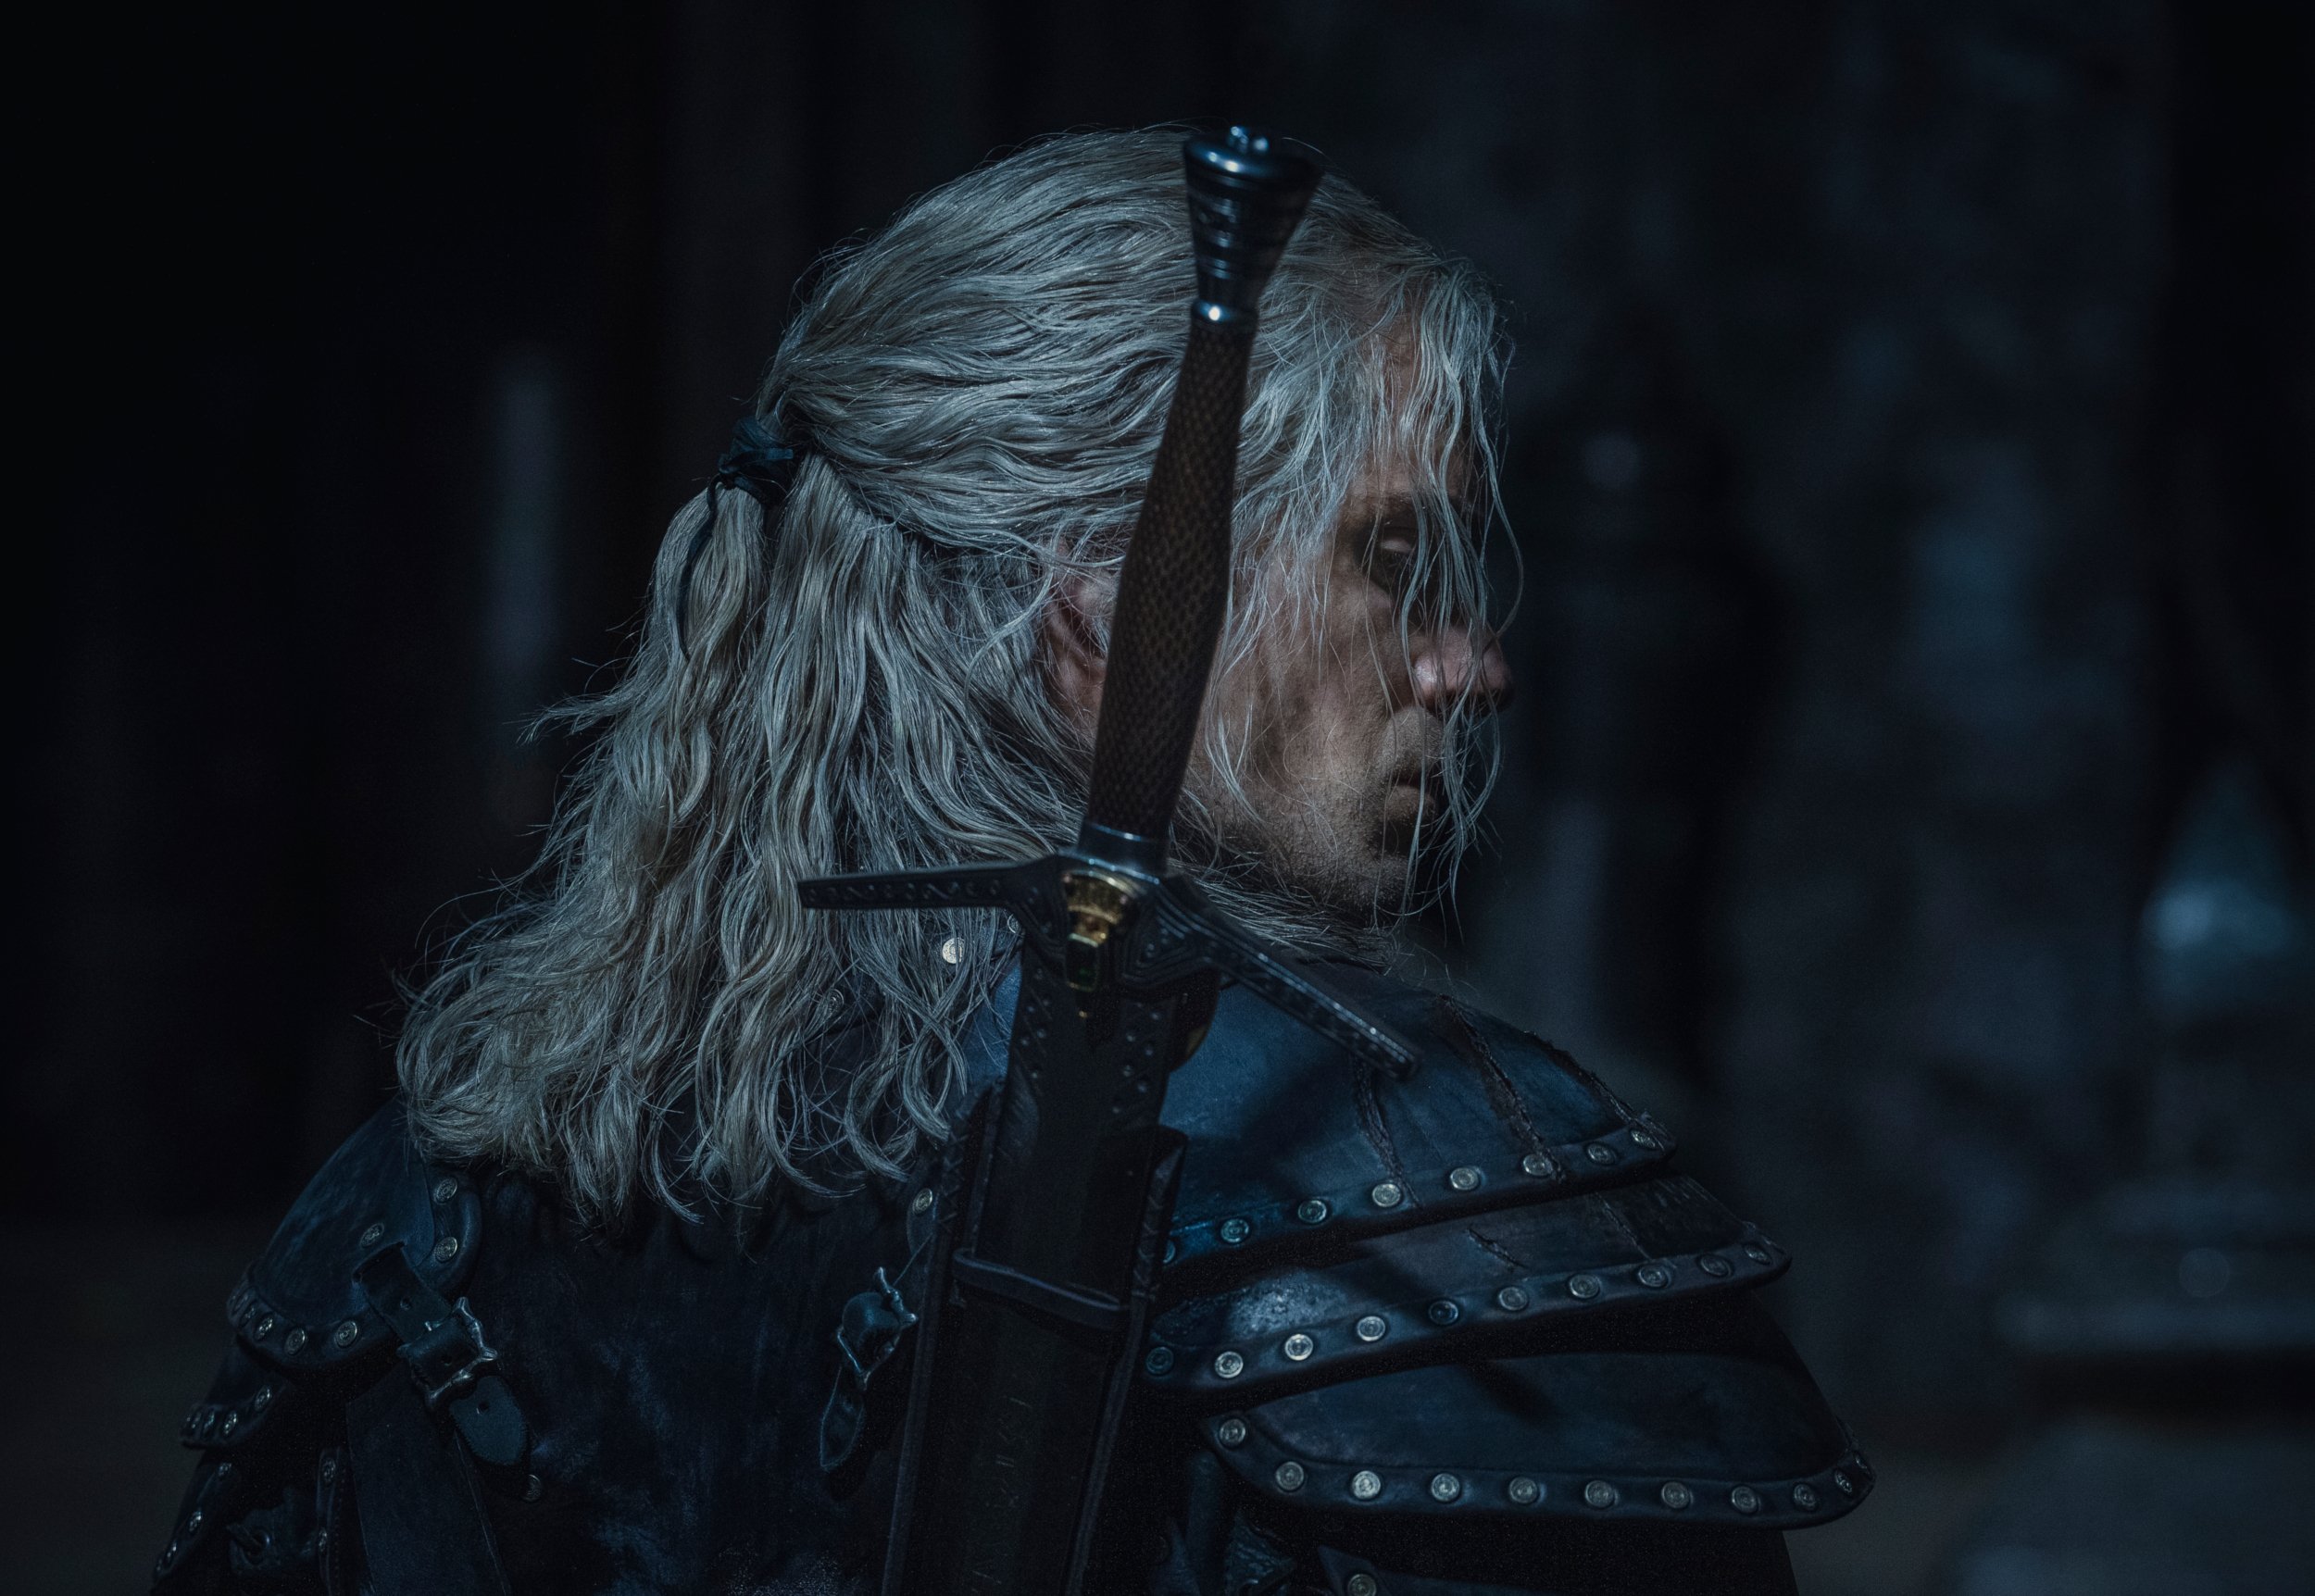 Henry Cavill as Witcher Geralt of Rivia wearing armor and carrying a sword